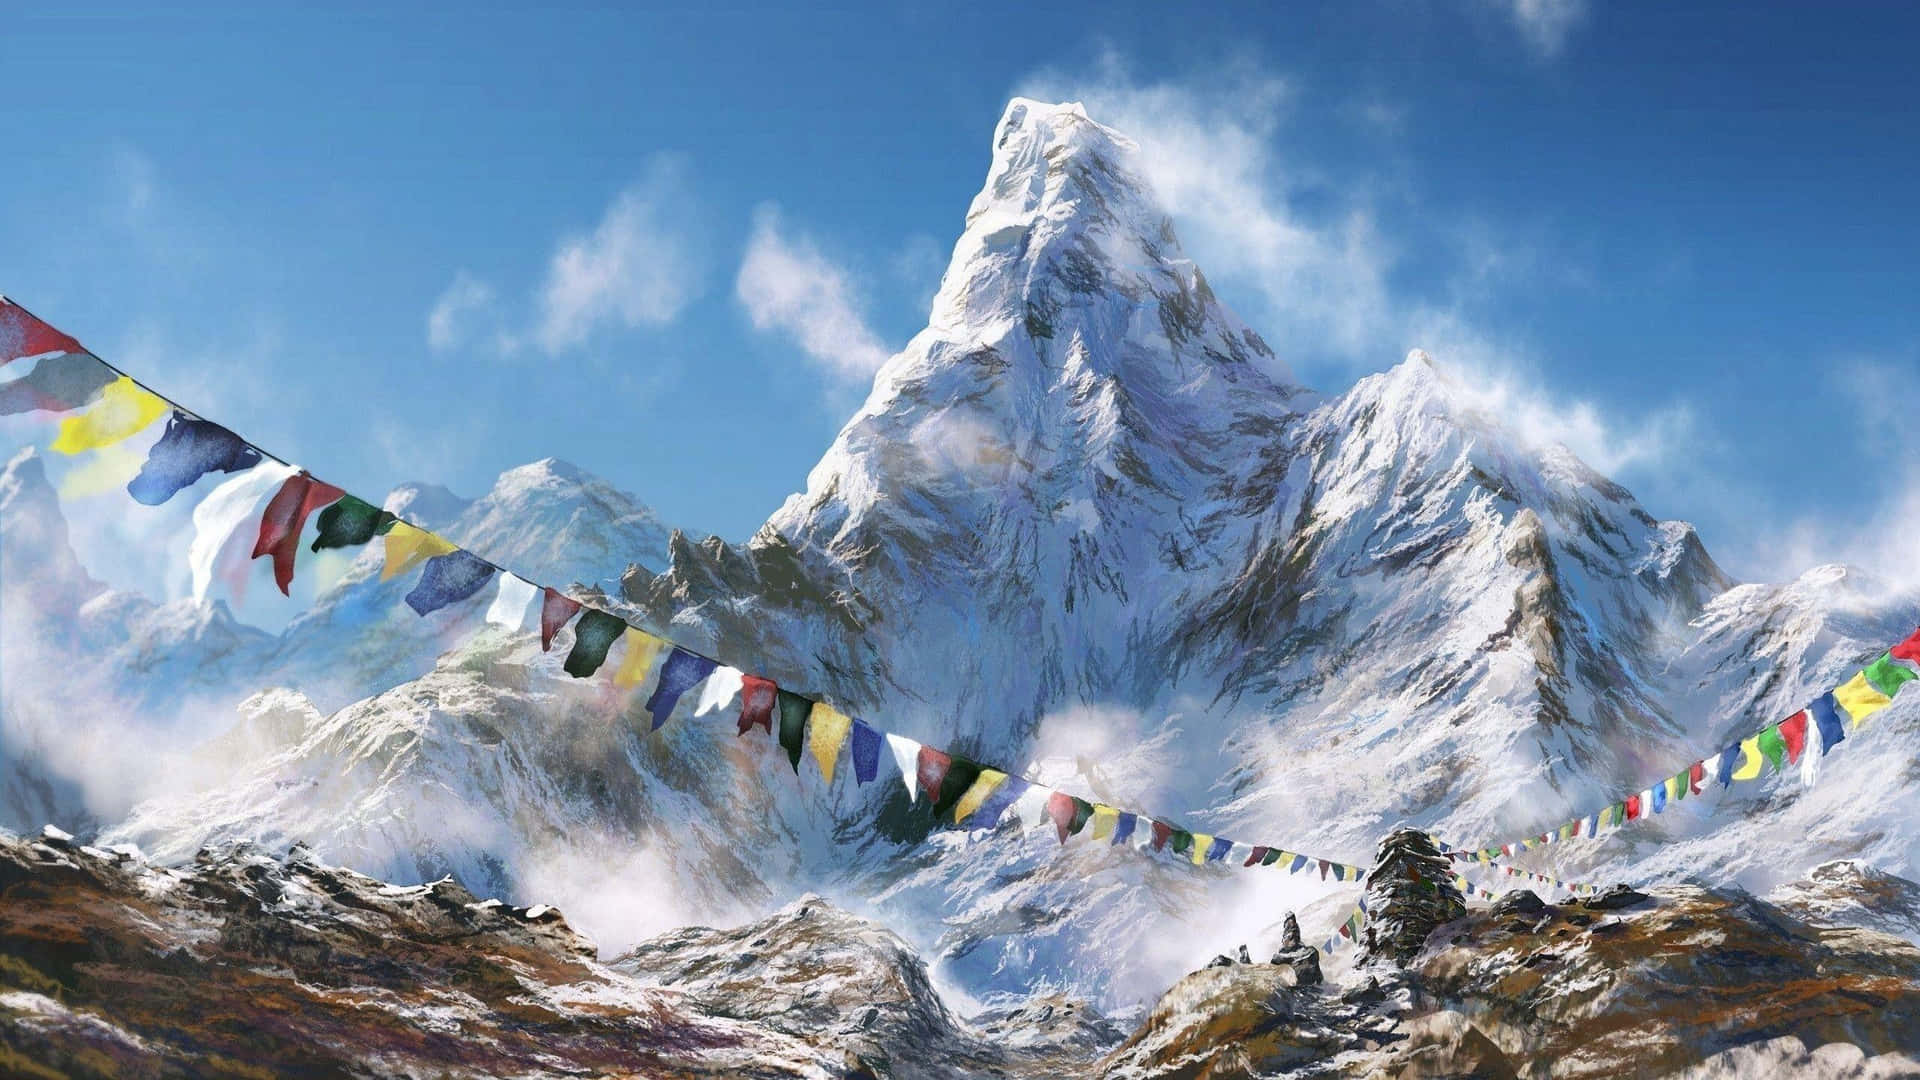 Taking in the stunning sights of the stunning Himalaya mountains.